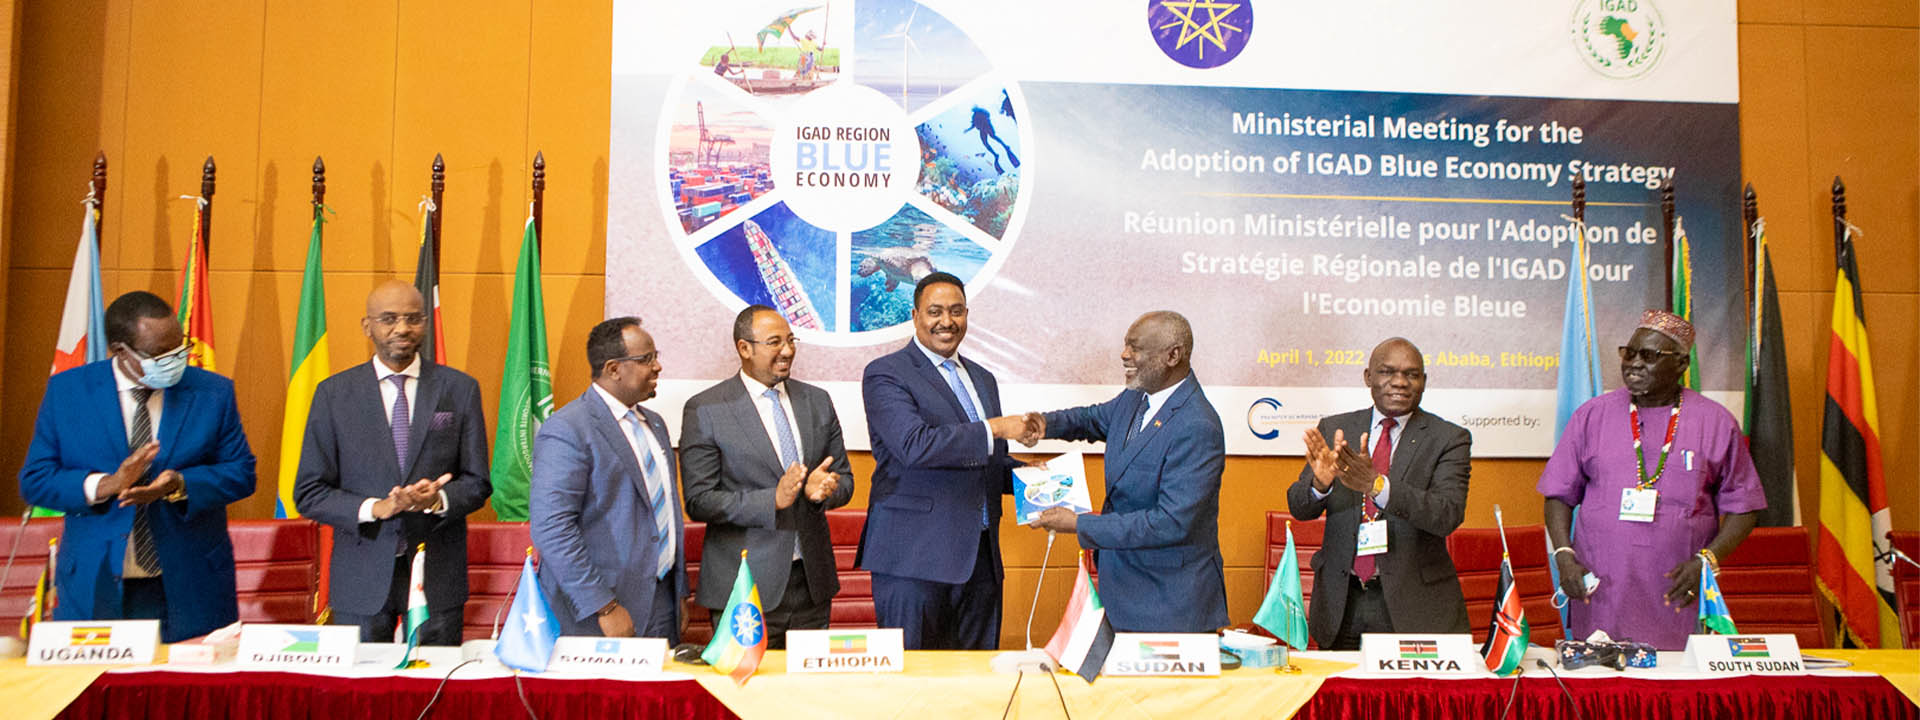 Ministers Endow IGAD With A Blue Economy Strategy